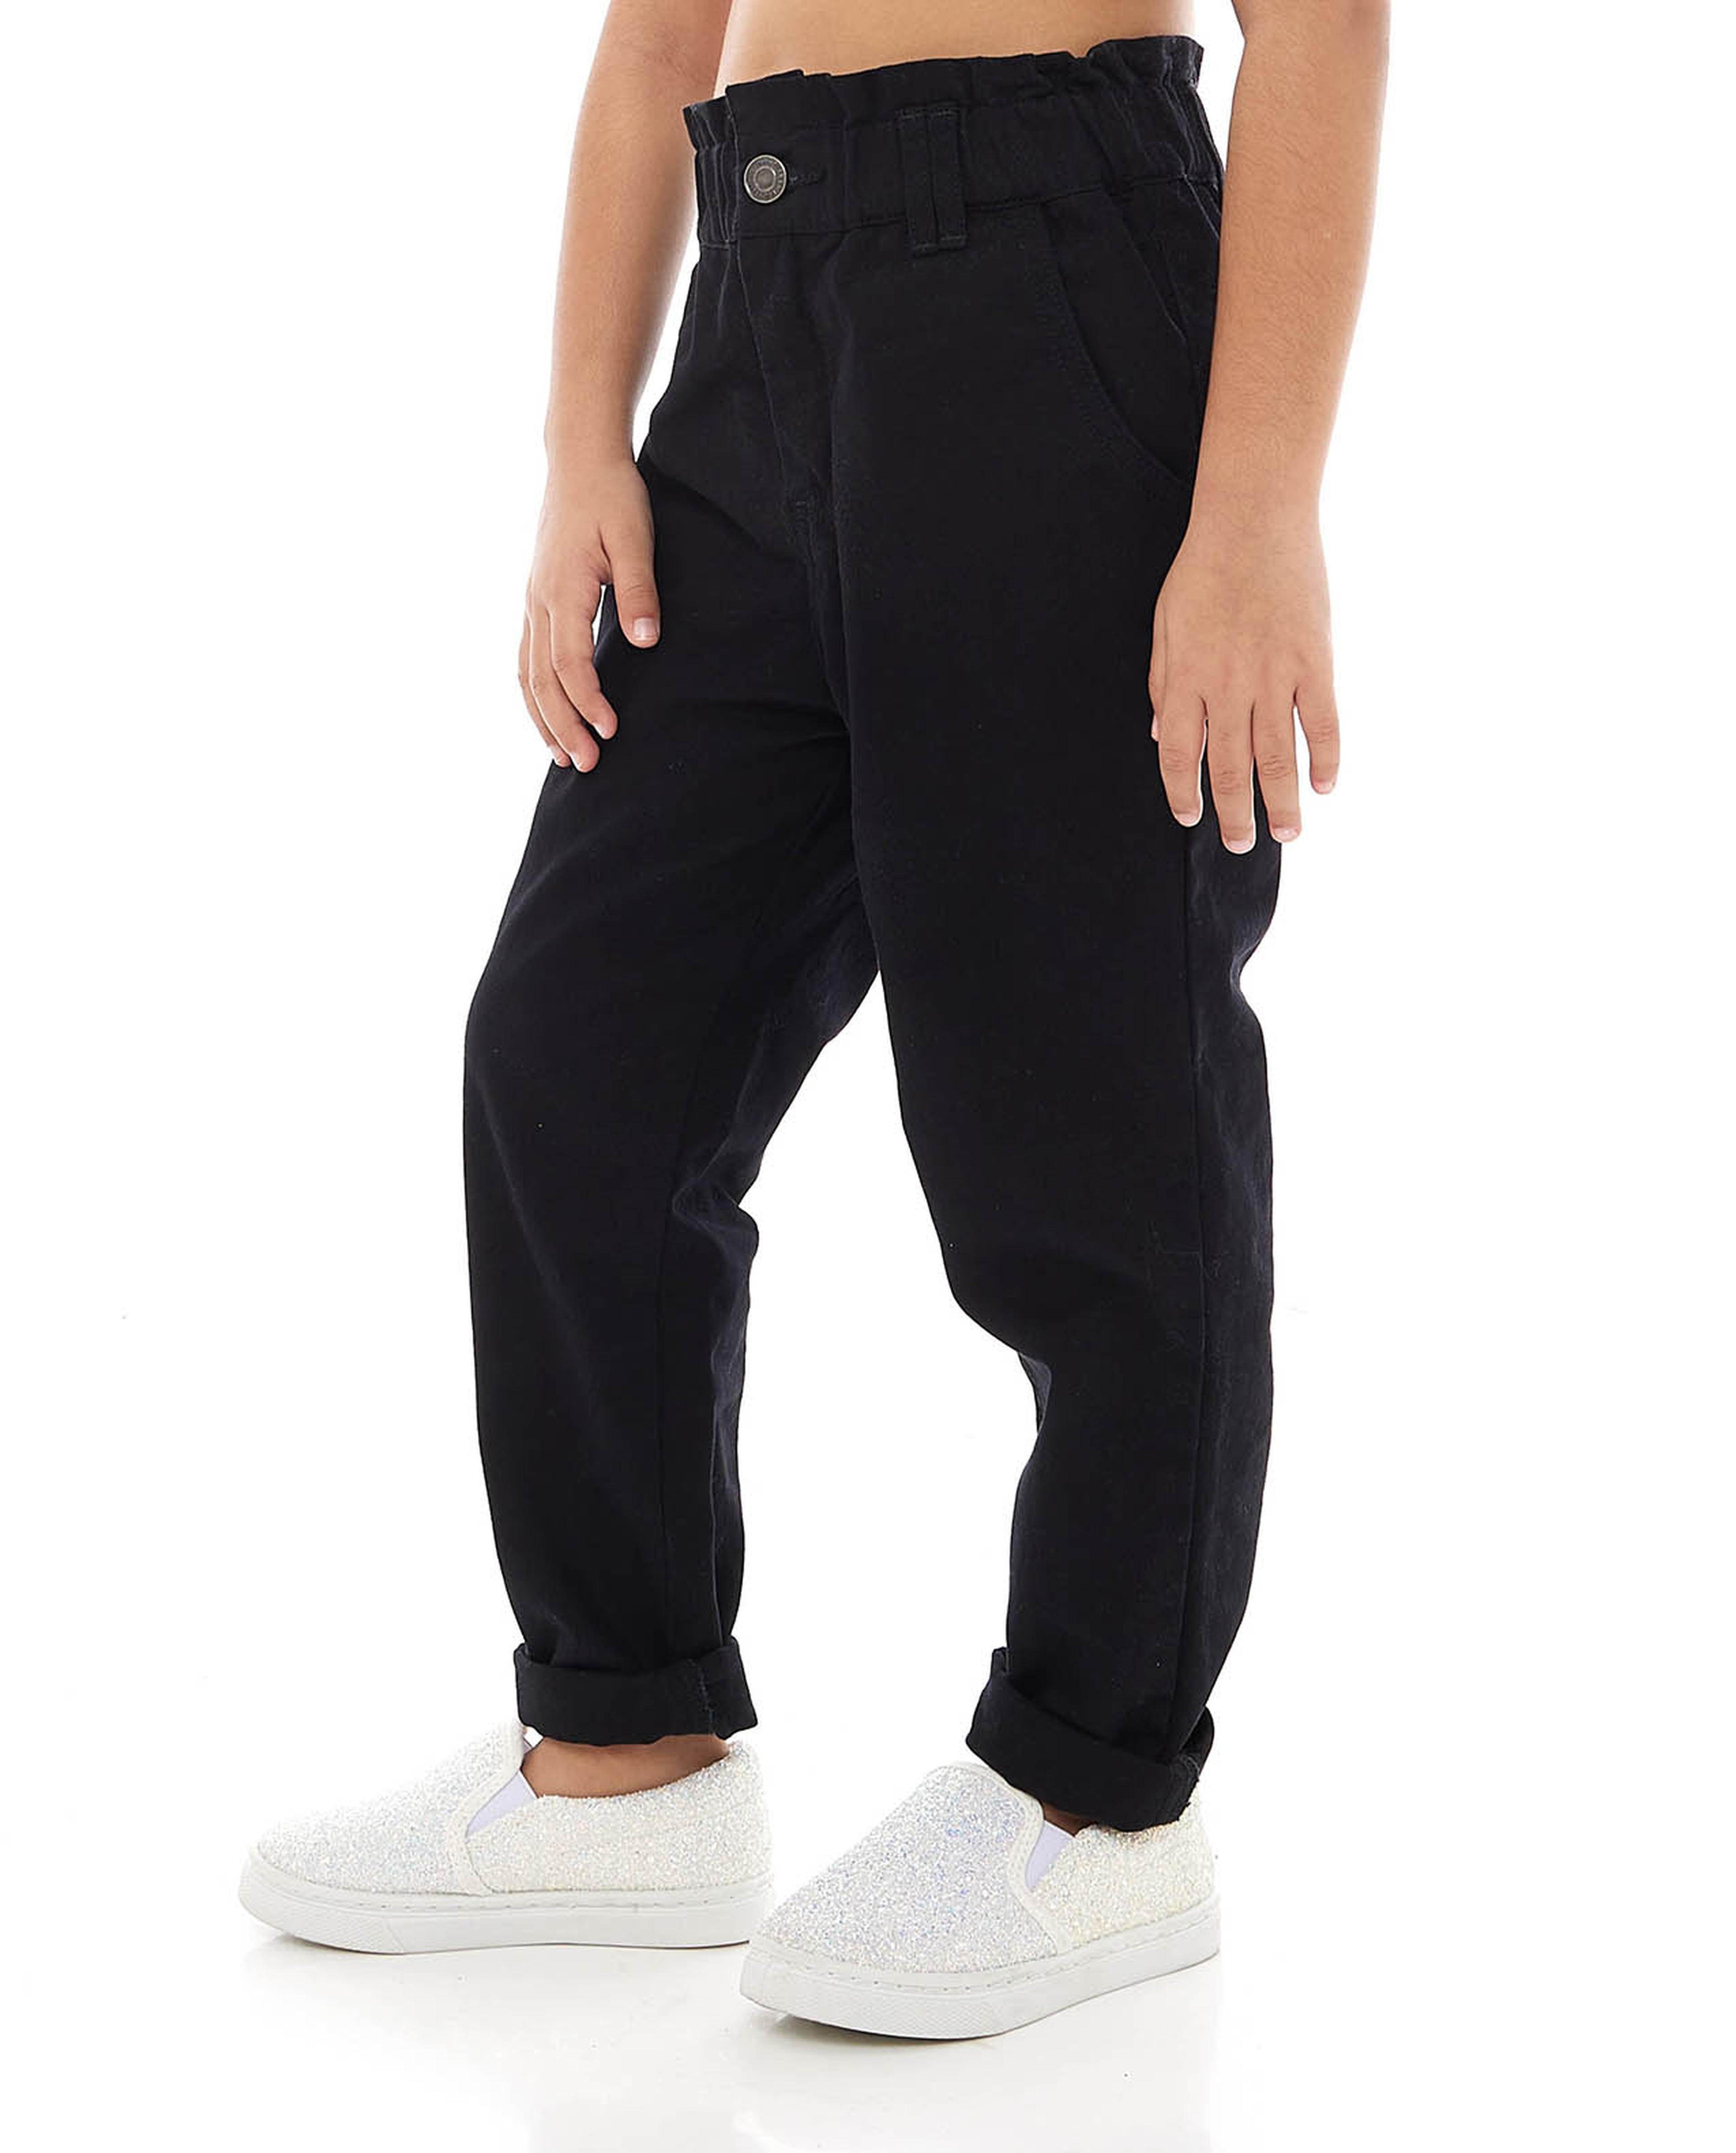 Solid Paperbag Waist Pants with Button Closure